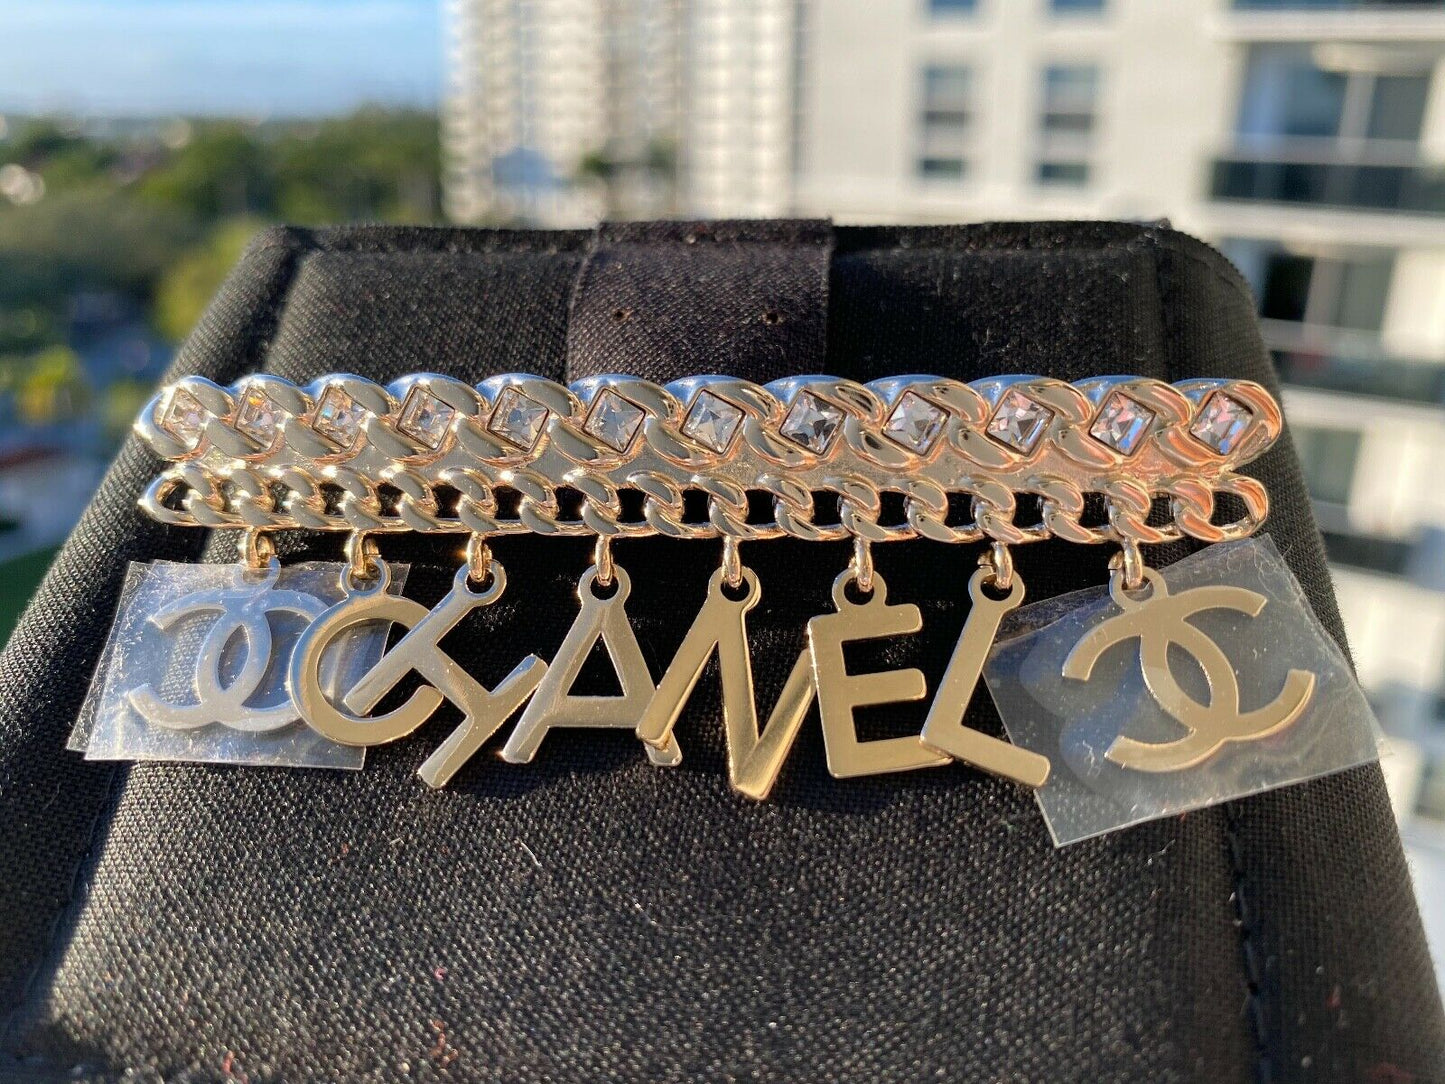 CHANEL GOLD "CHA"NEL" CC LOGO WHITE CRYSTALS CHARMS BROOCH PIN